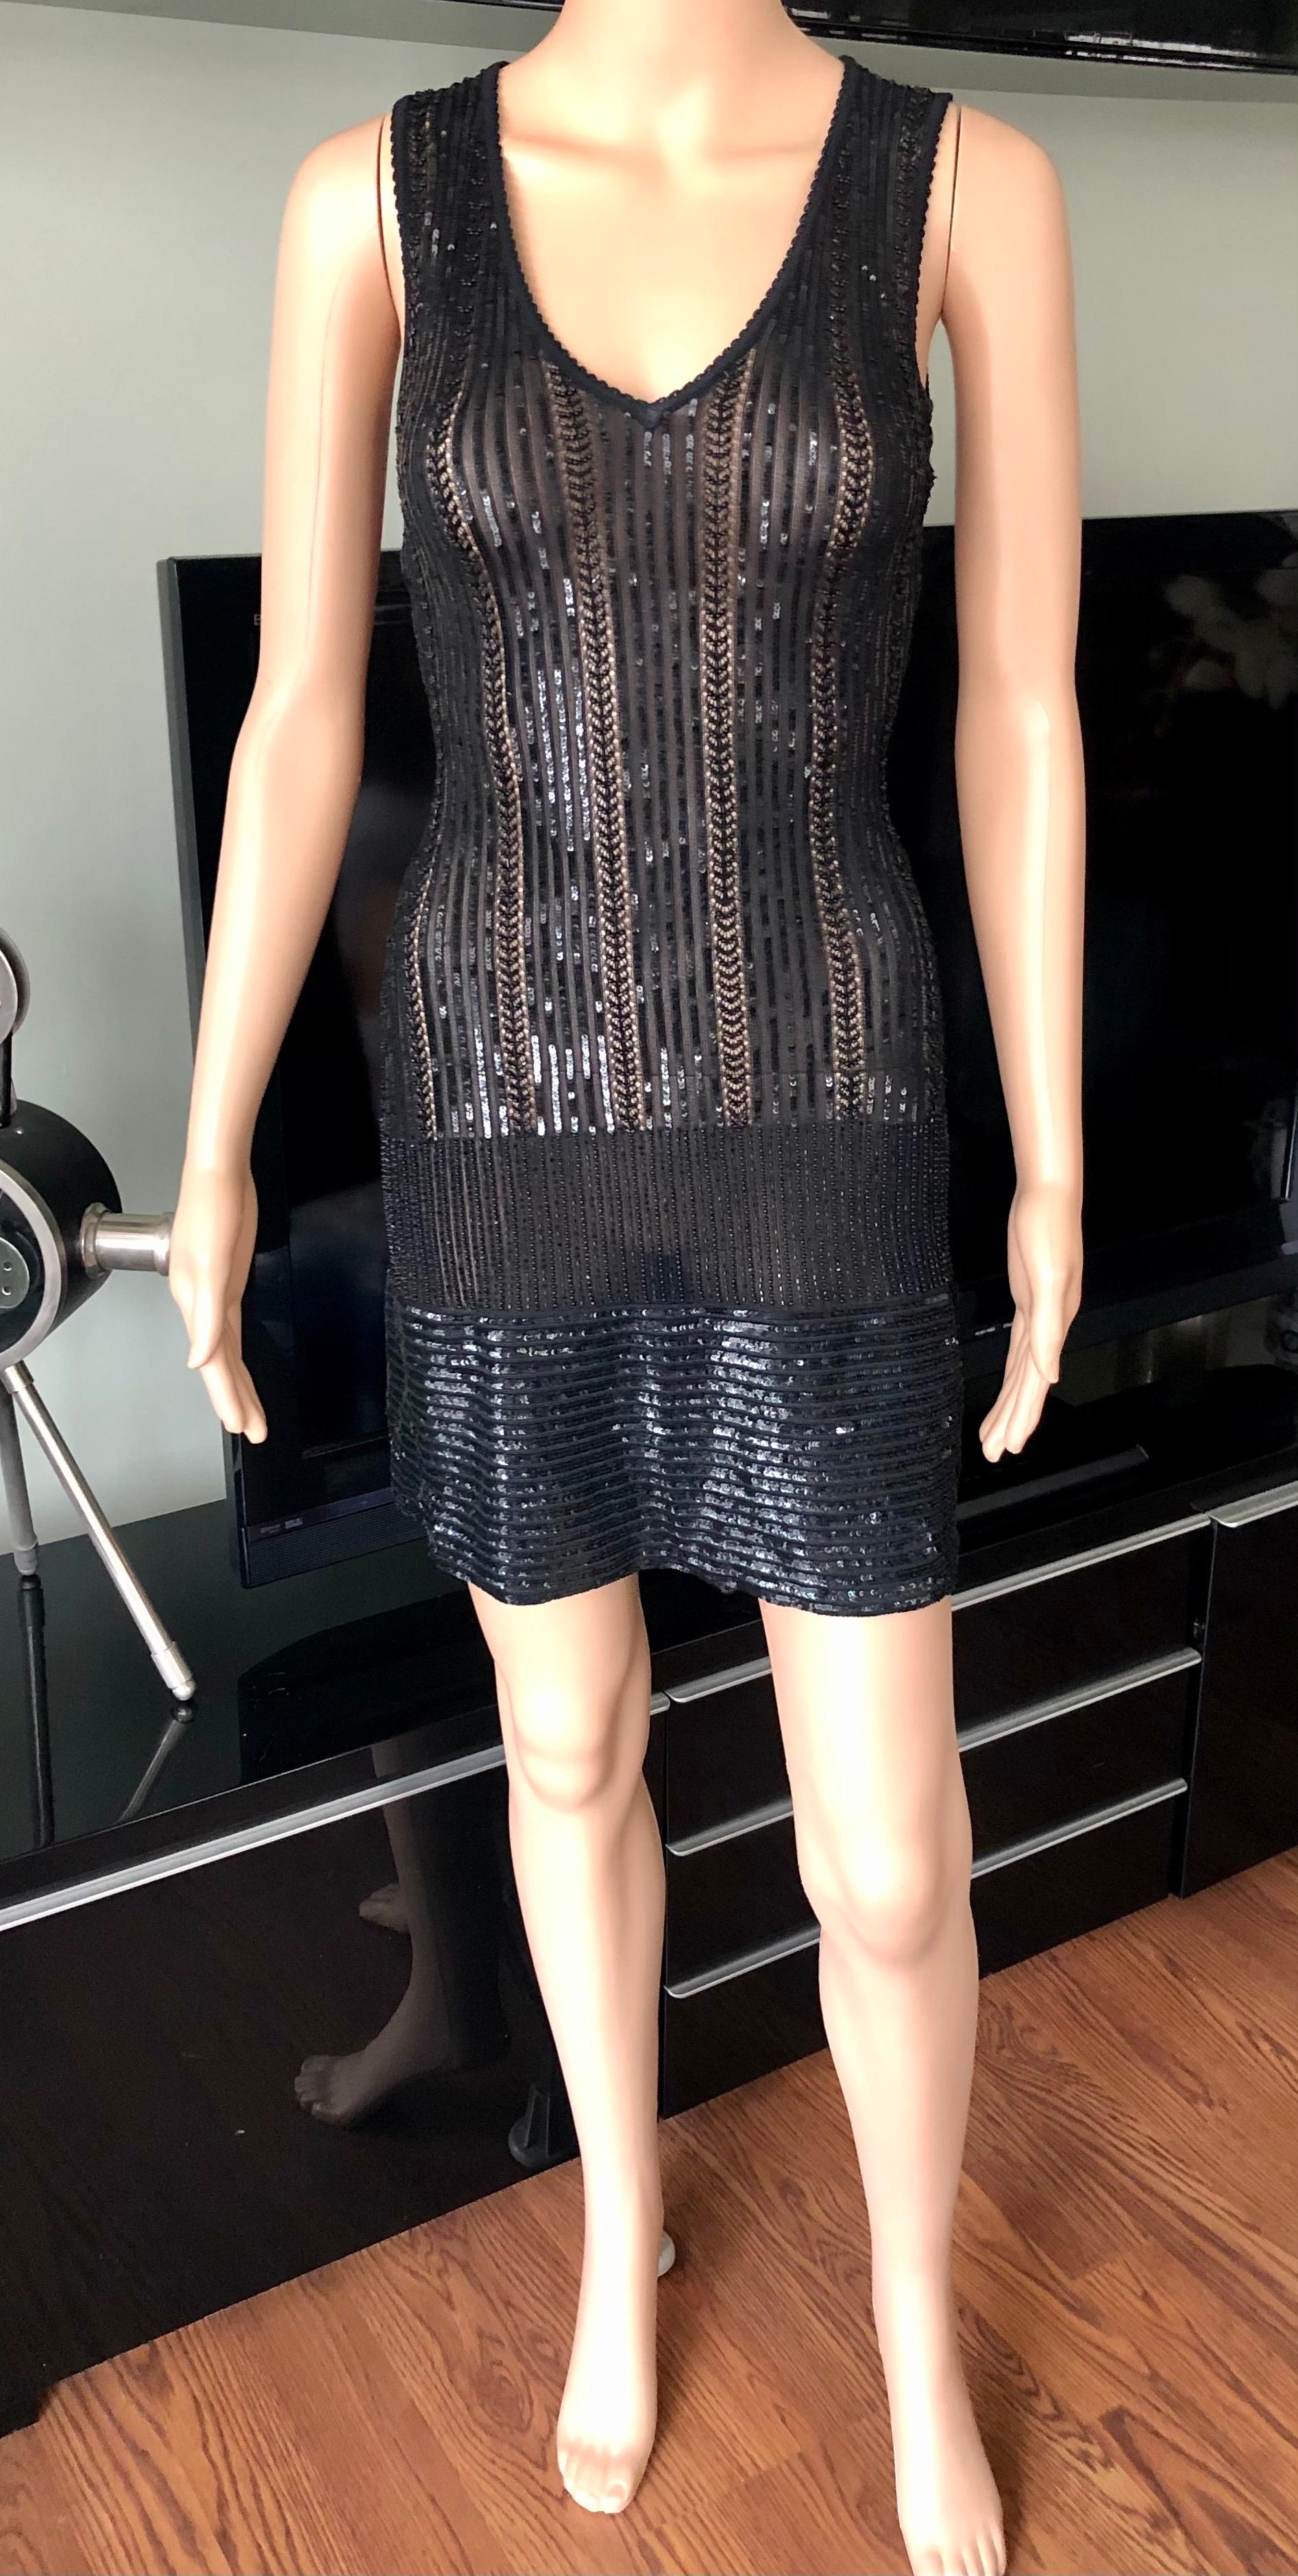 Azzedine Alaia Vintage S/S 1996 Black Sequin Beaded Embellished Mini Dress Size XS

Excellent Condition. Size XS

Black vintage Alaïa sleeveless beaded dress featuring bead and sequin embellishments throughout and scoop neck.



